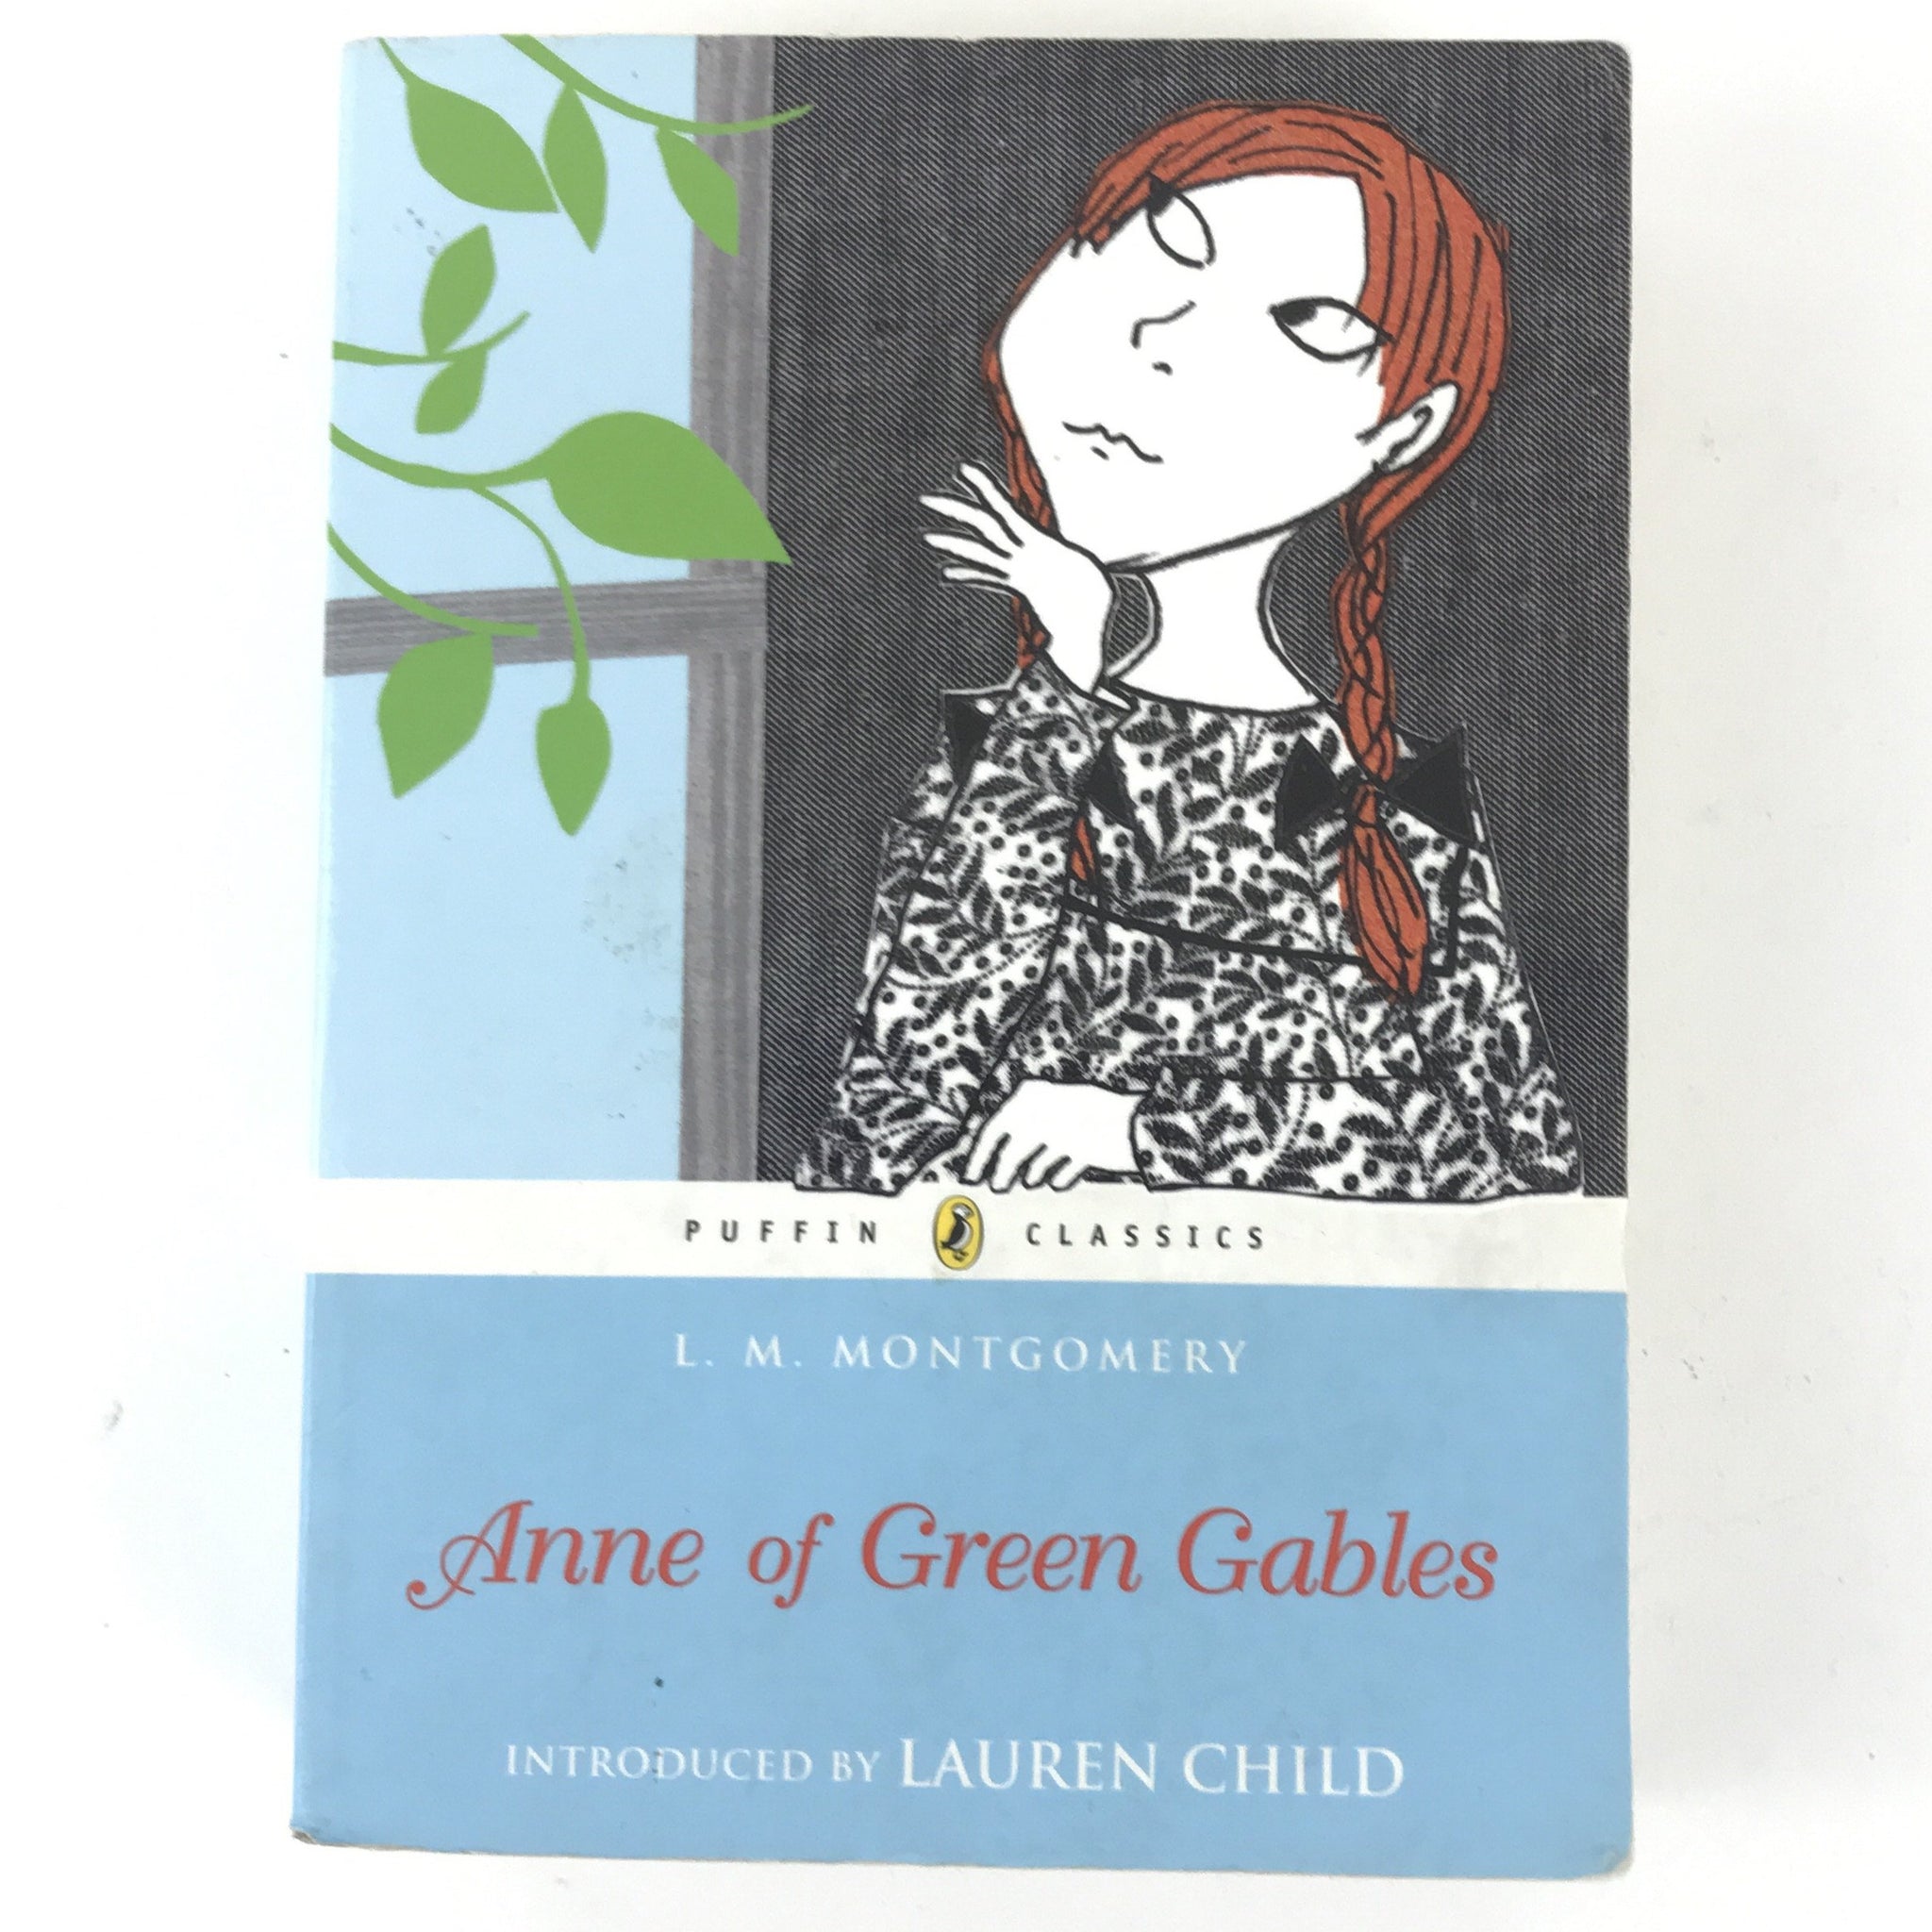 Anne Of Green Gables by L. M. Montgomery - Puffin Classics